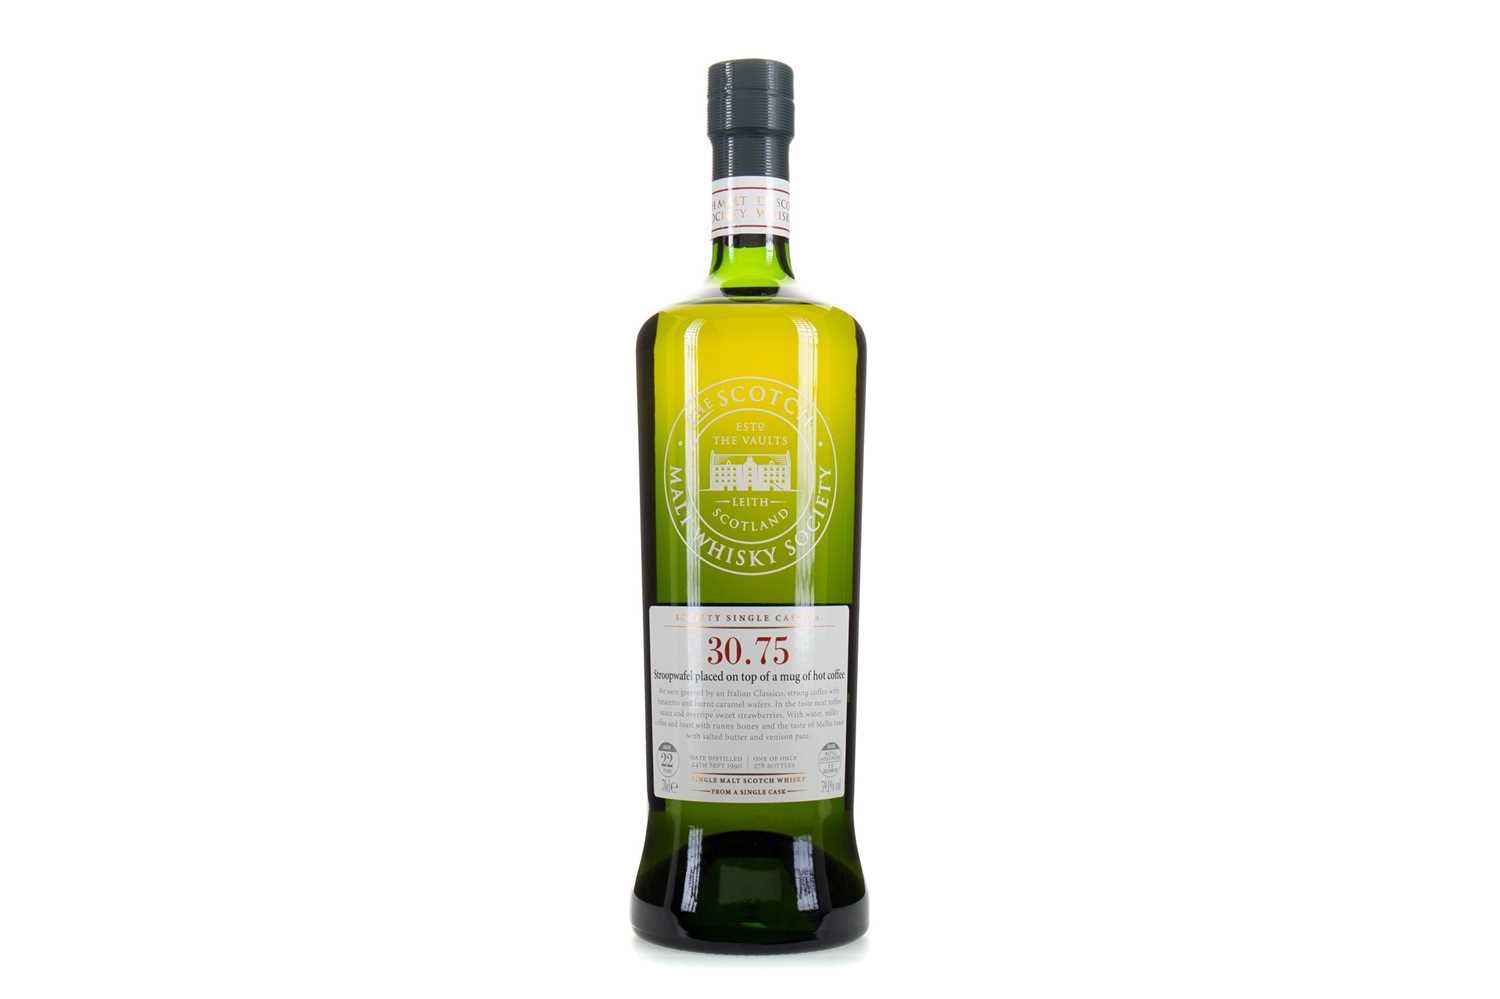 Lot 524 - SMWS 30.75 GLENROTHES 1990 22 YEAR OLD